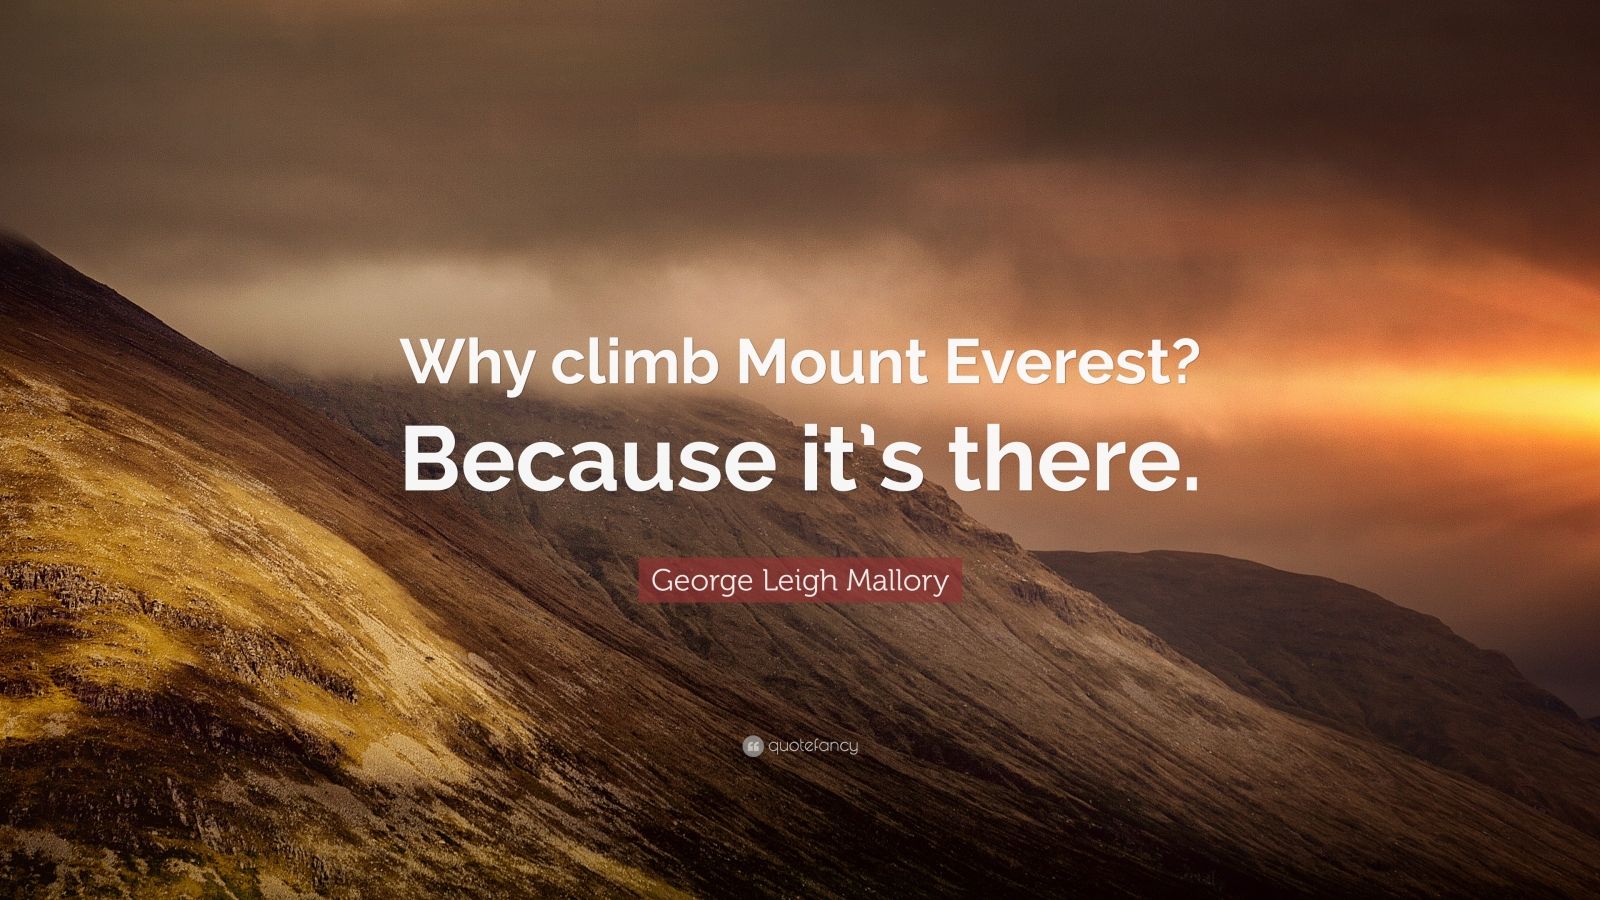 George Leigh Mallory Quote: “Why climb Mount Everest? Because it’s